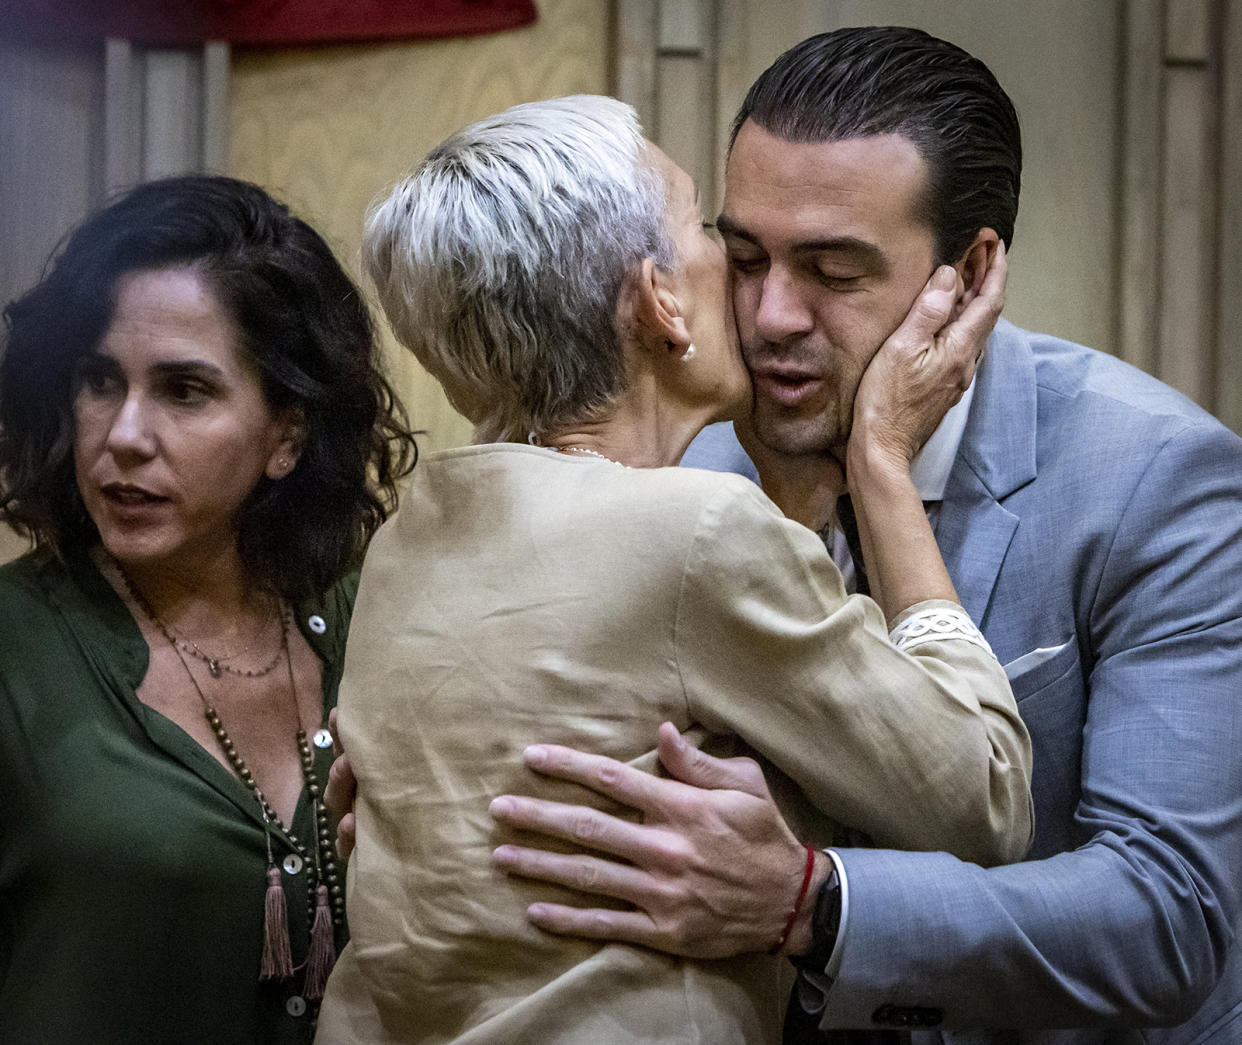 Pablo Lyle, right, gets a kiss from his aunt before the start of pre-trial motions in Miami-Dade Criminal Court on Thursday, Sept. 22, 2022, in Miami, Florida. Lyle is accused of killing 63-year-old Juan Ricardo Hernandez during a road rage incident in 2019. (Jose A. Iglesias/Miami Herald/Tribune News Service via Getty Images)